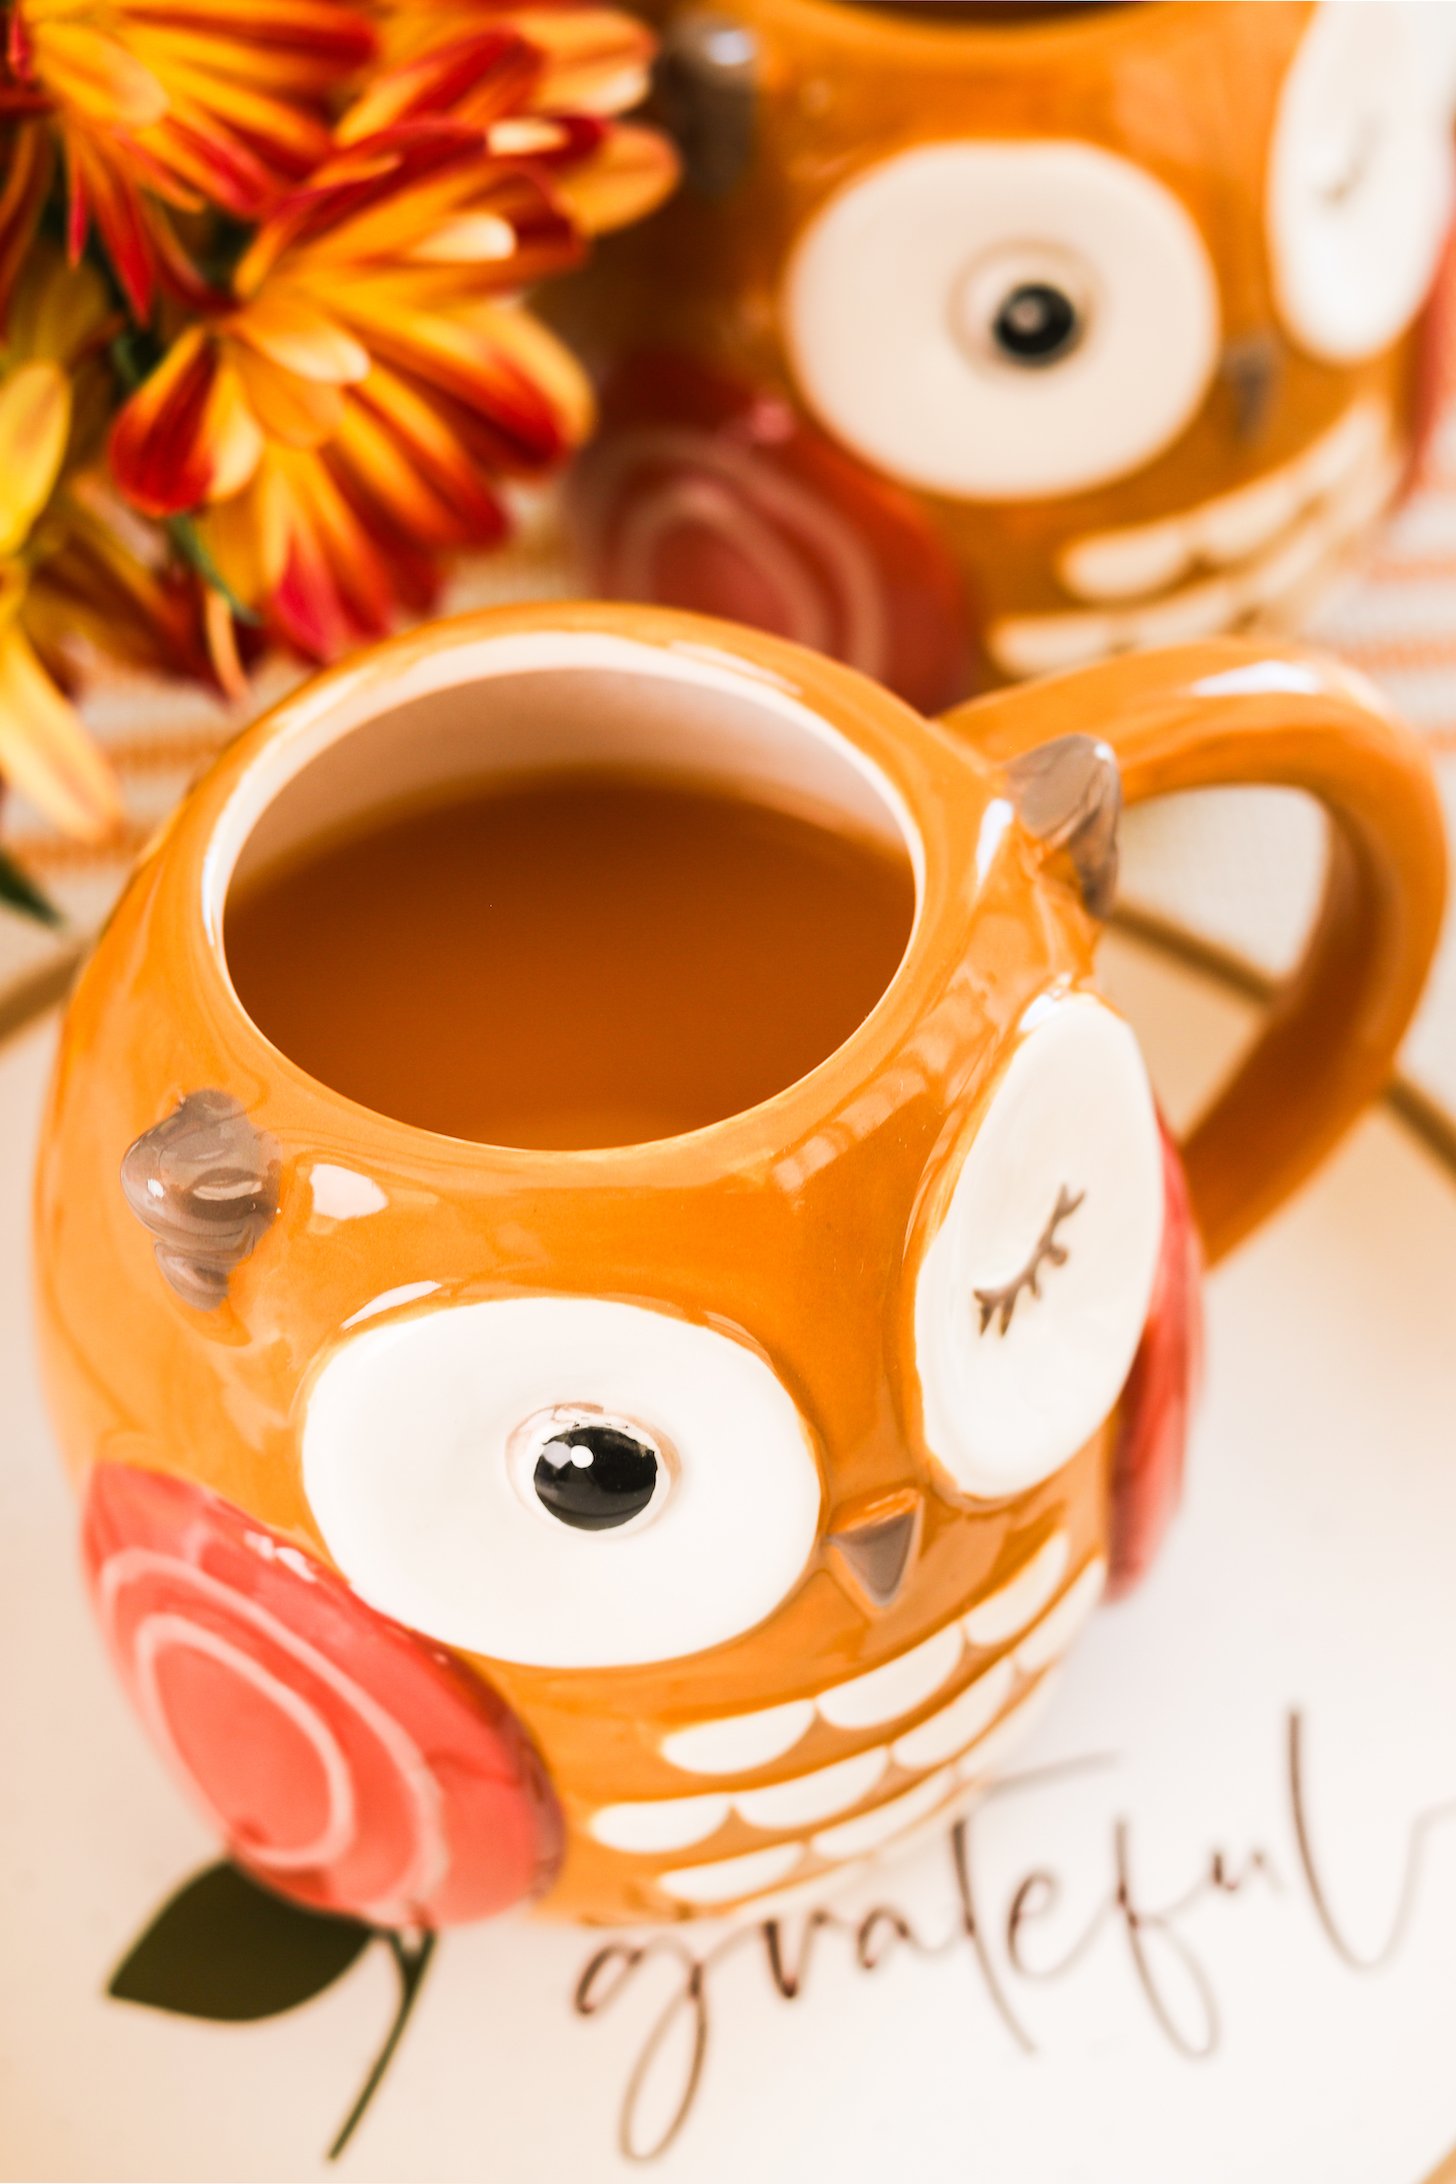 A close up perspective image of two owl mugs filled with chai apple cider with flowers in the background.